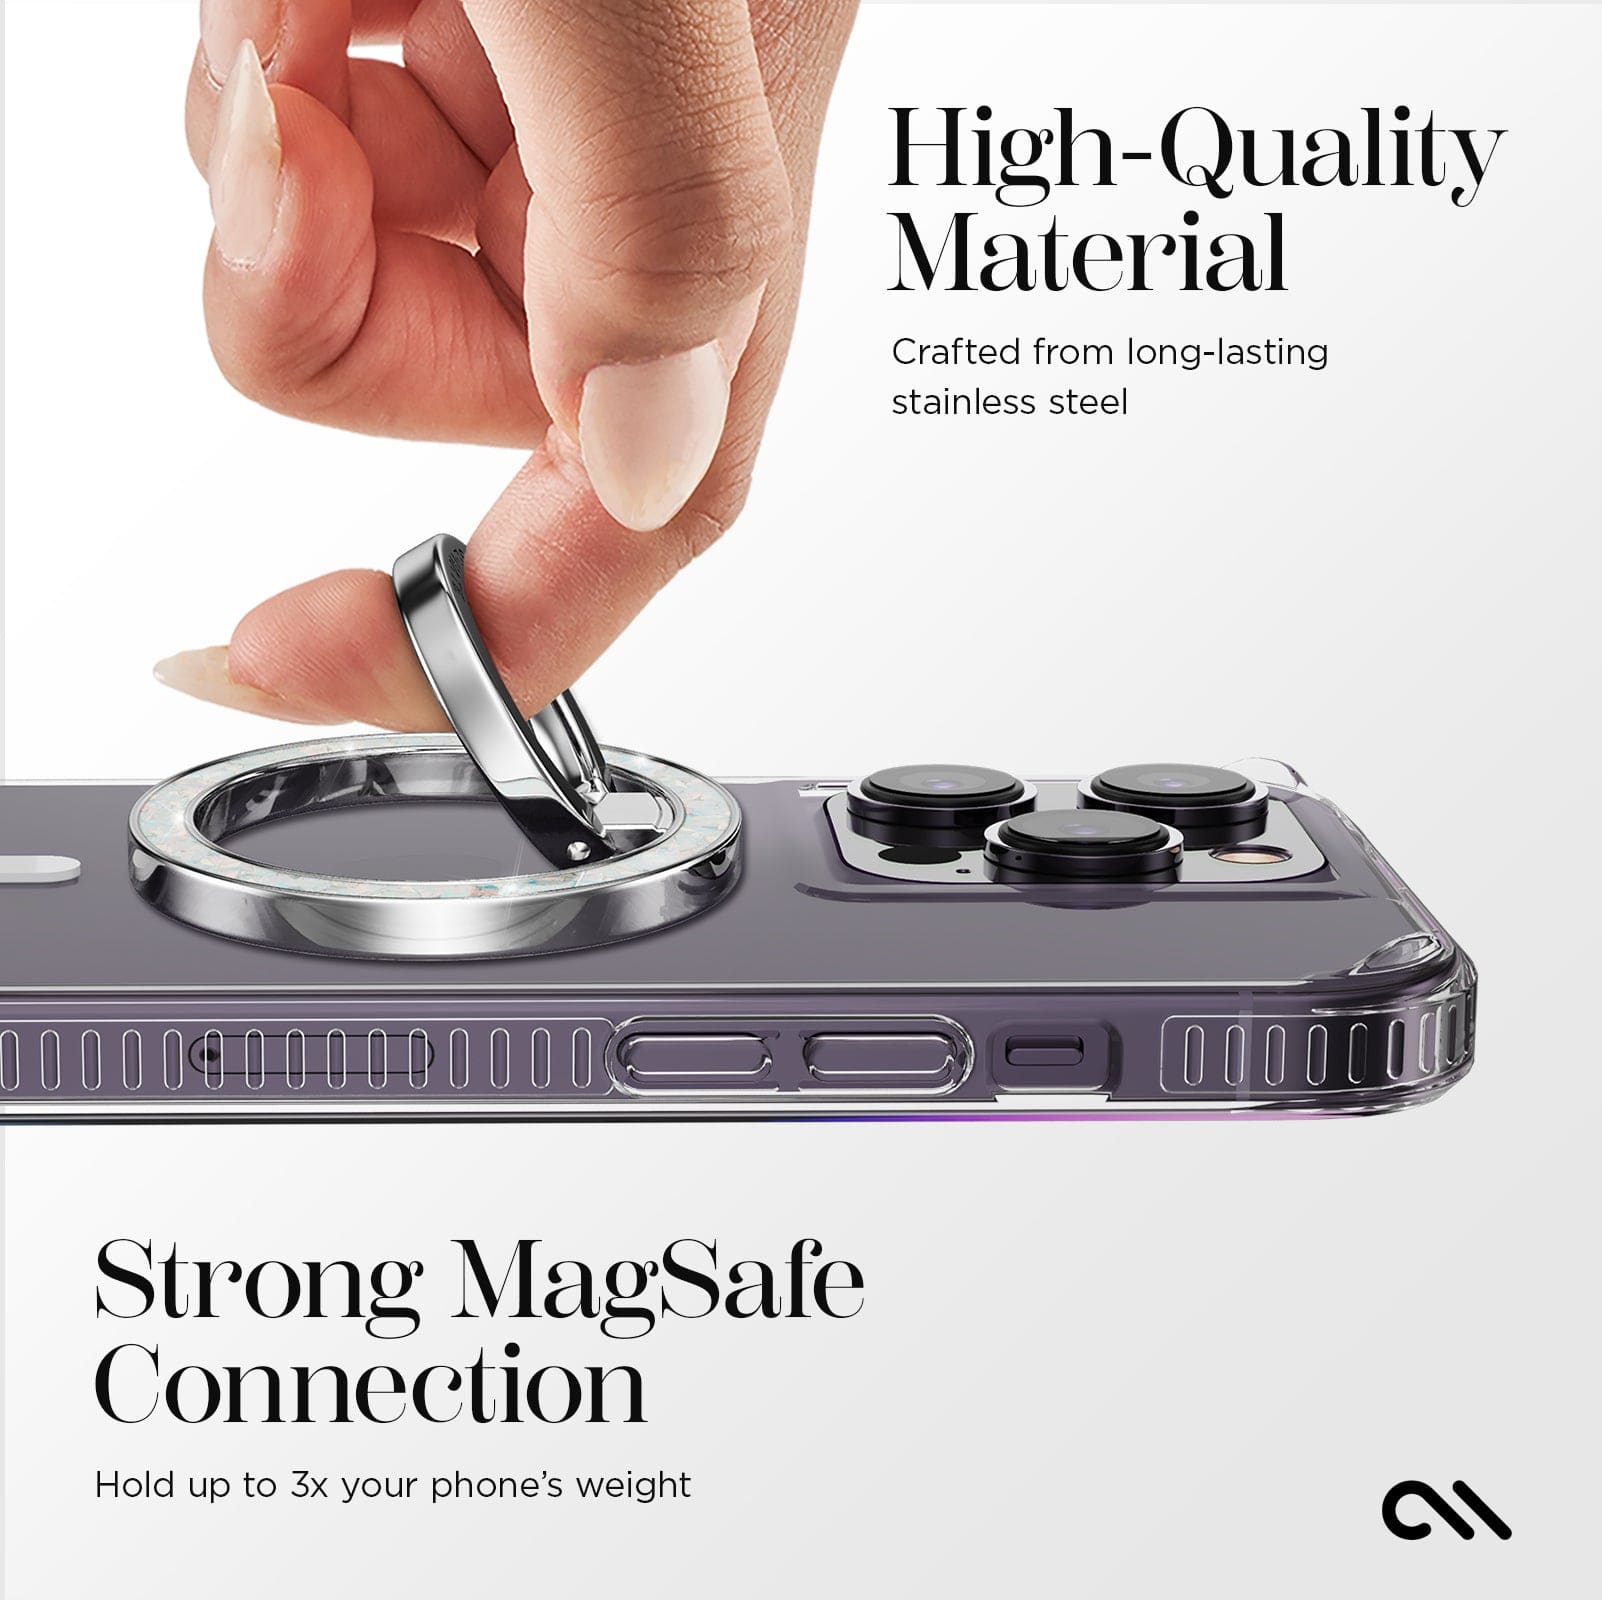 HIGH-QUALITY MATERIAL. CRAFTED FROM LONG-LASTING STAINLESS STEEL. STRONG MAGSAFE CONNECTION. HOLD UP TO 3X YOUR PHONE'S WEIGHT.